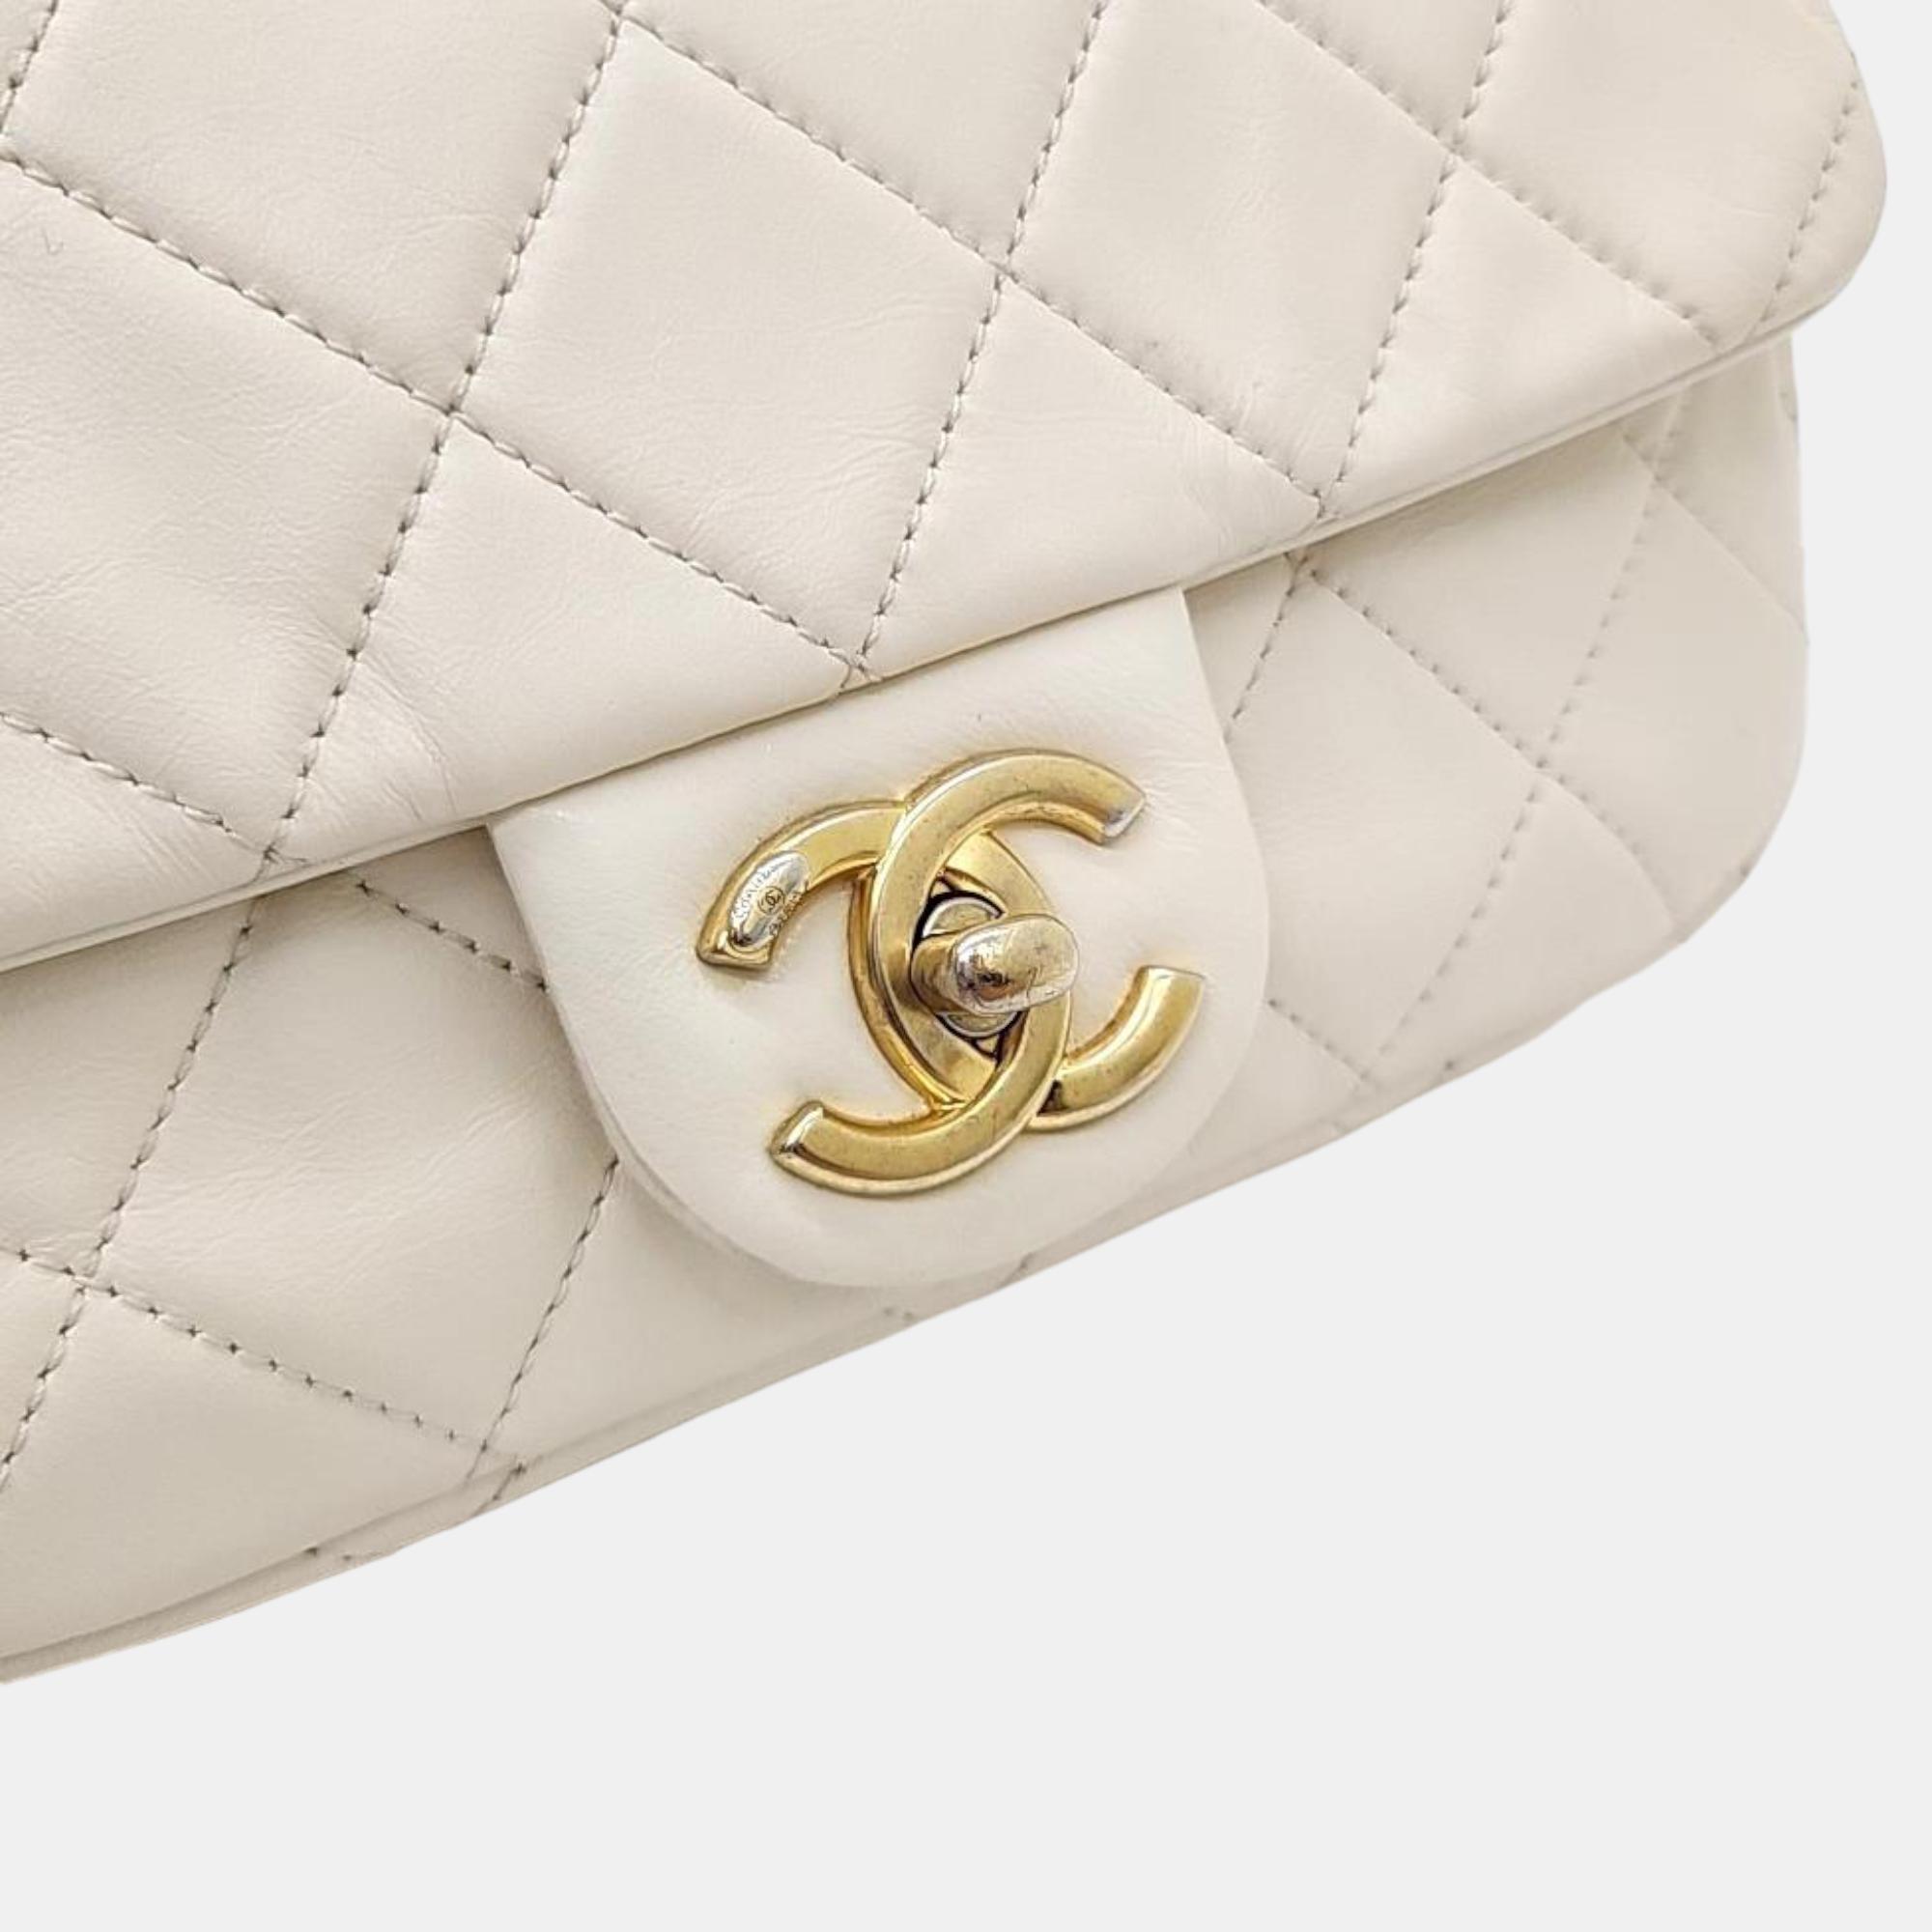 Chanel White Leather Pearl Chain Cross Bag